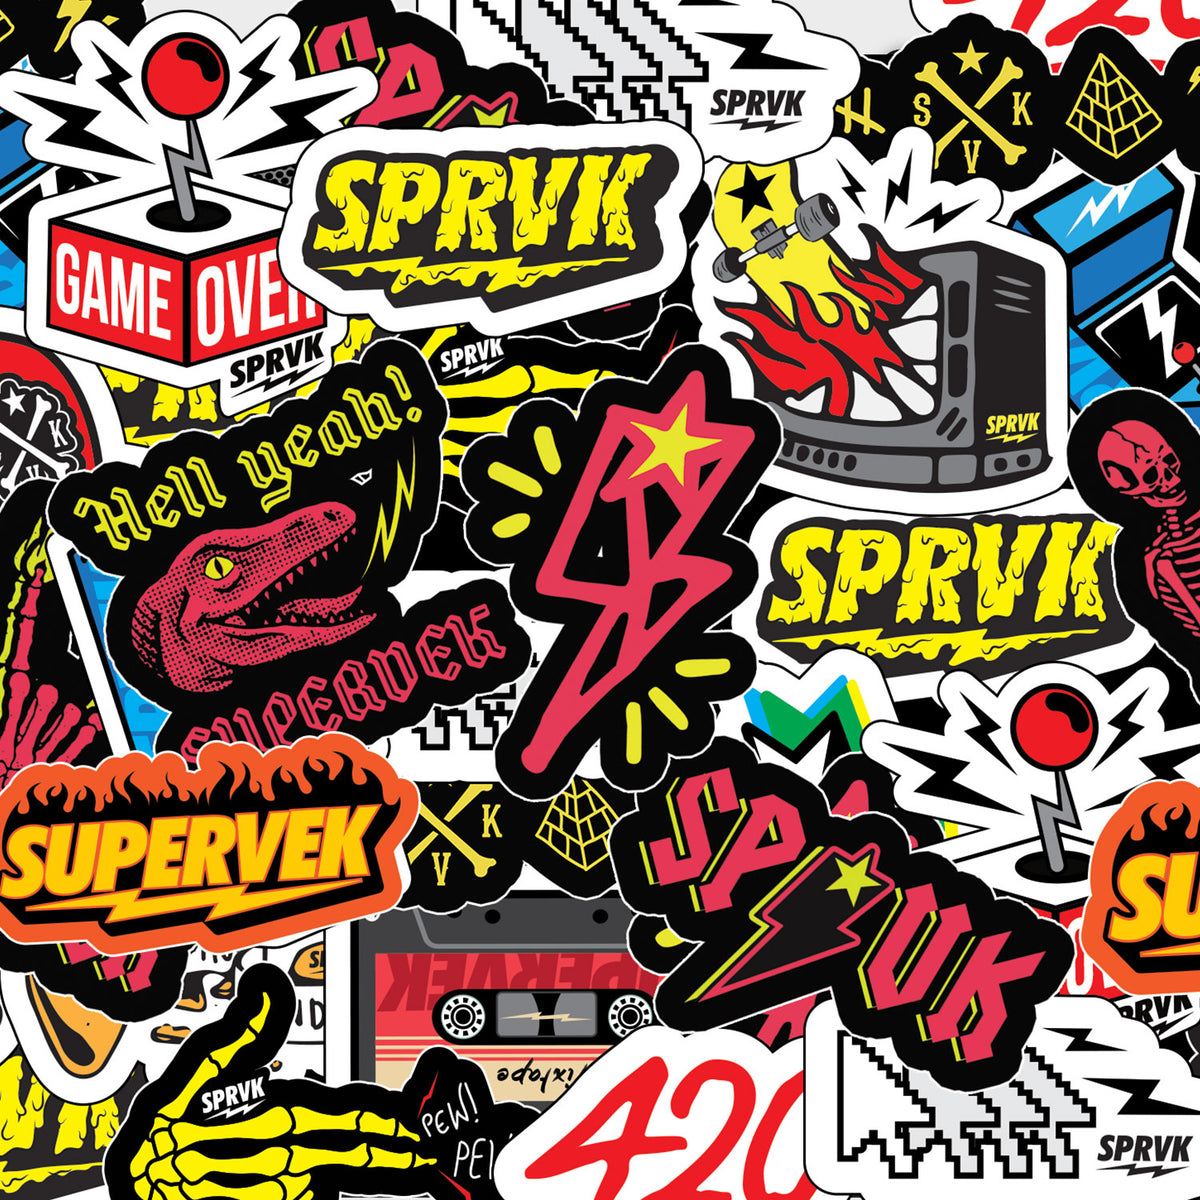 Buy Vintage Stickers Online In India -  India